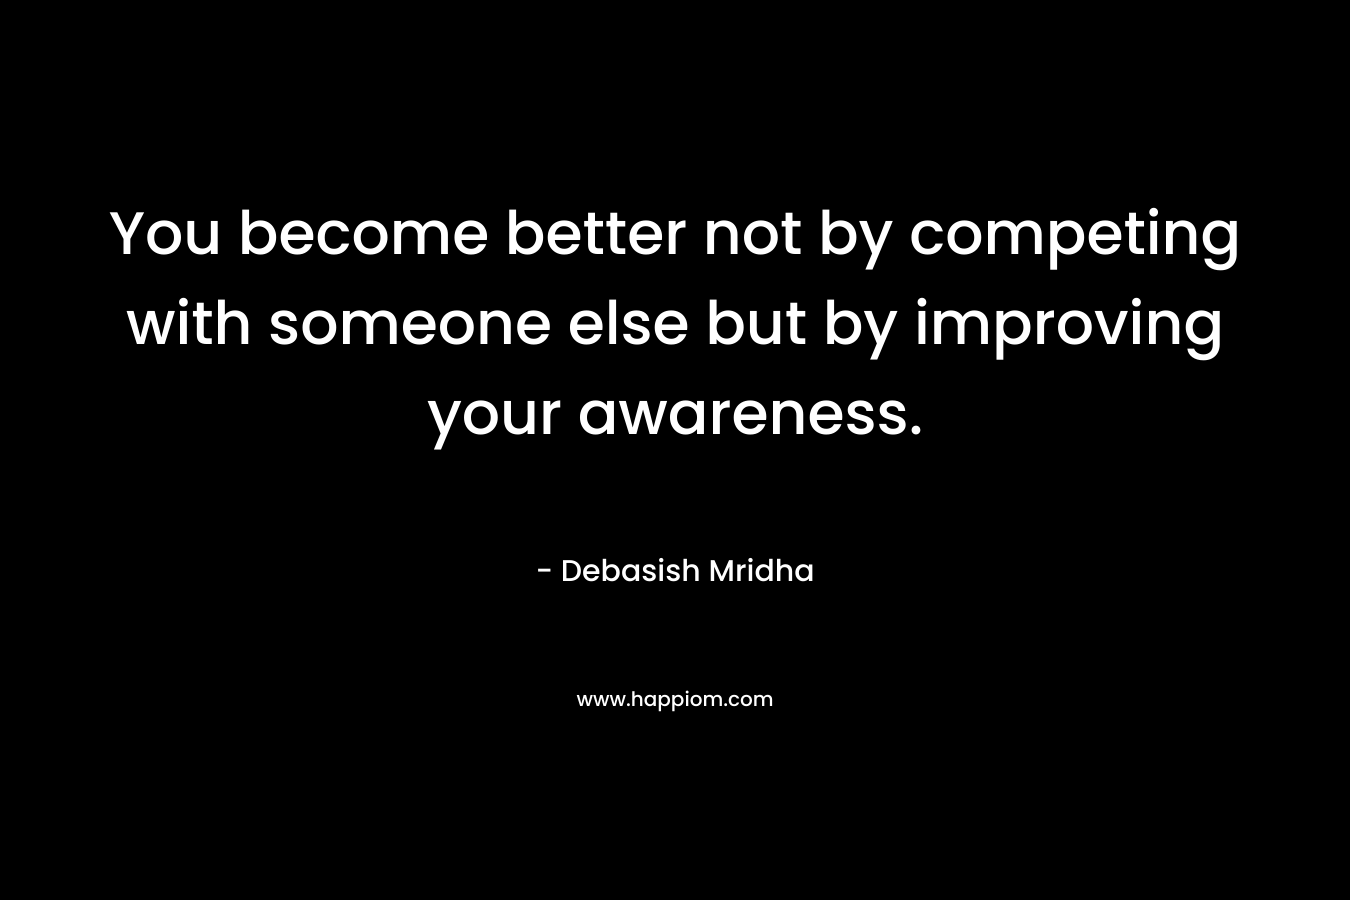 You become better not by competing with someone else but by improving your awareness. – Debasish Mridha